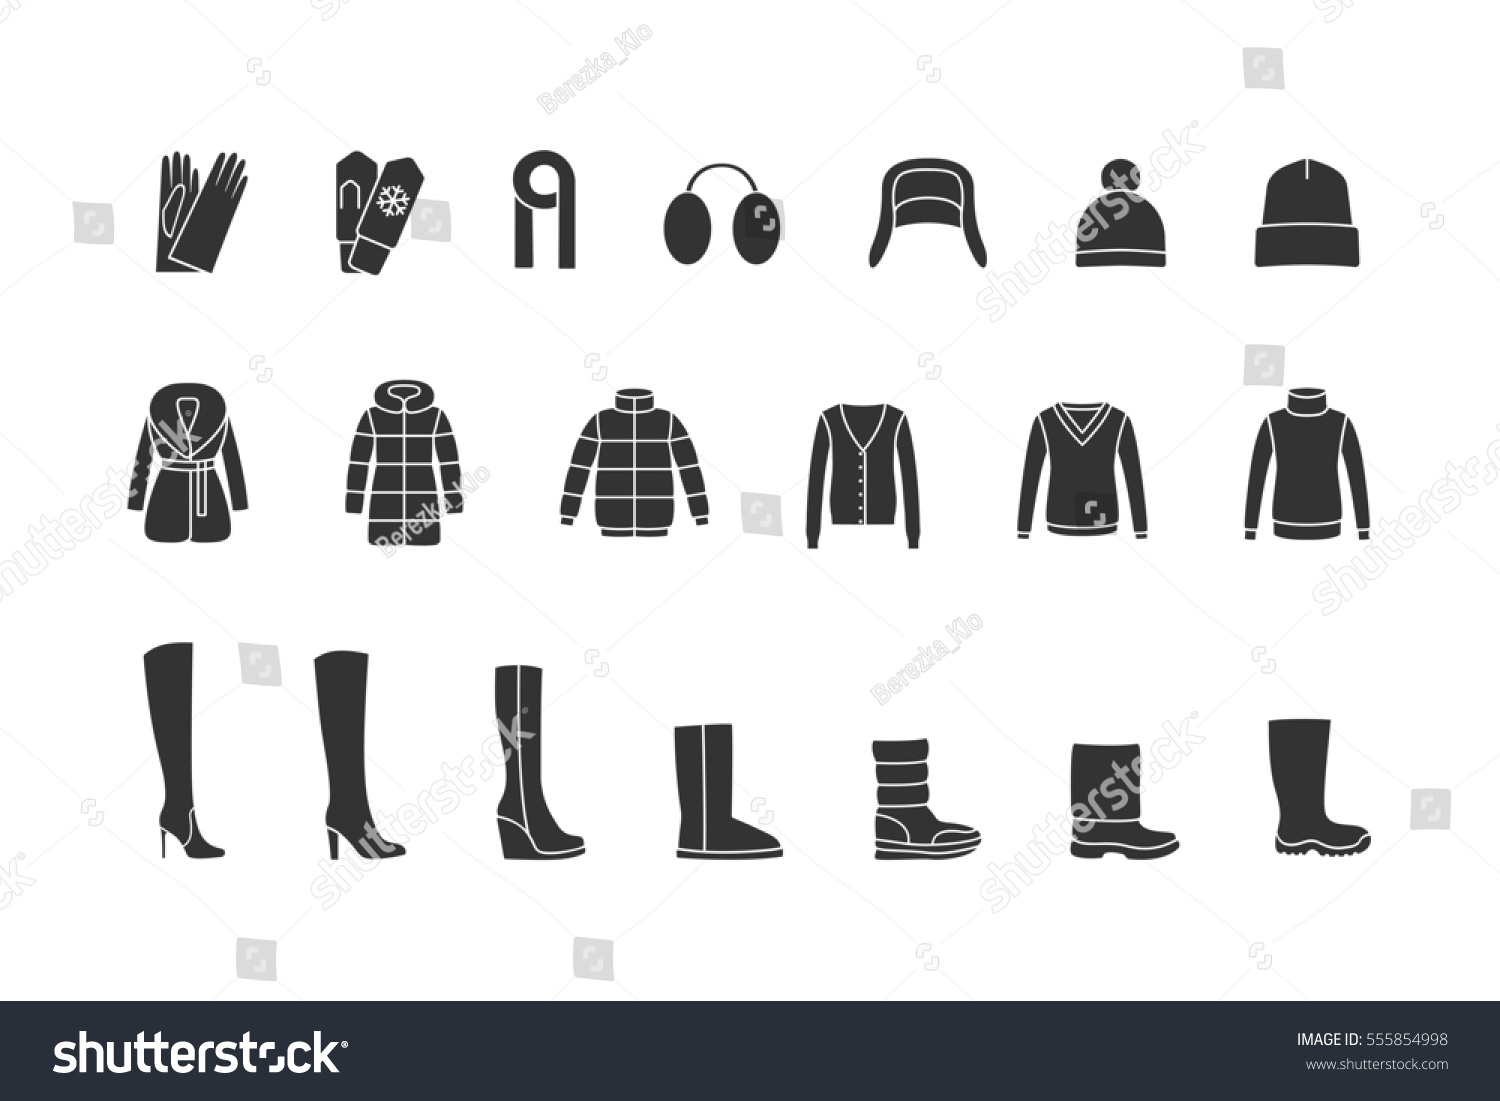 2,064 Down jacket icon Images, Stock Photos & Vectors | Shutterstock